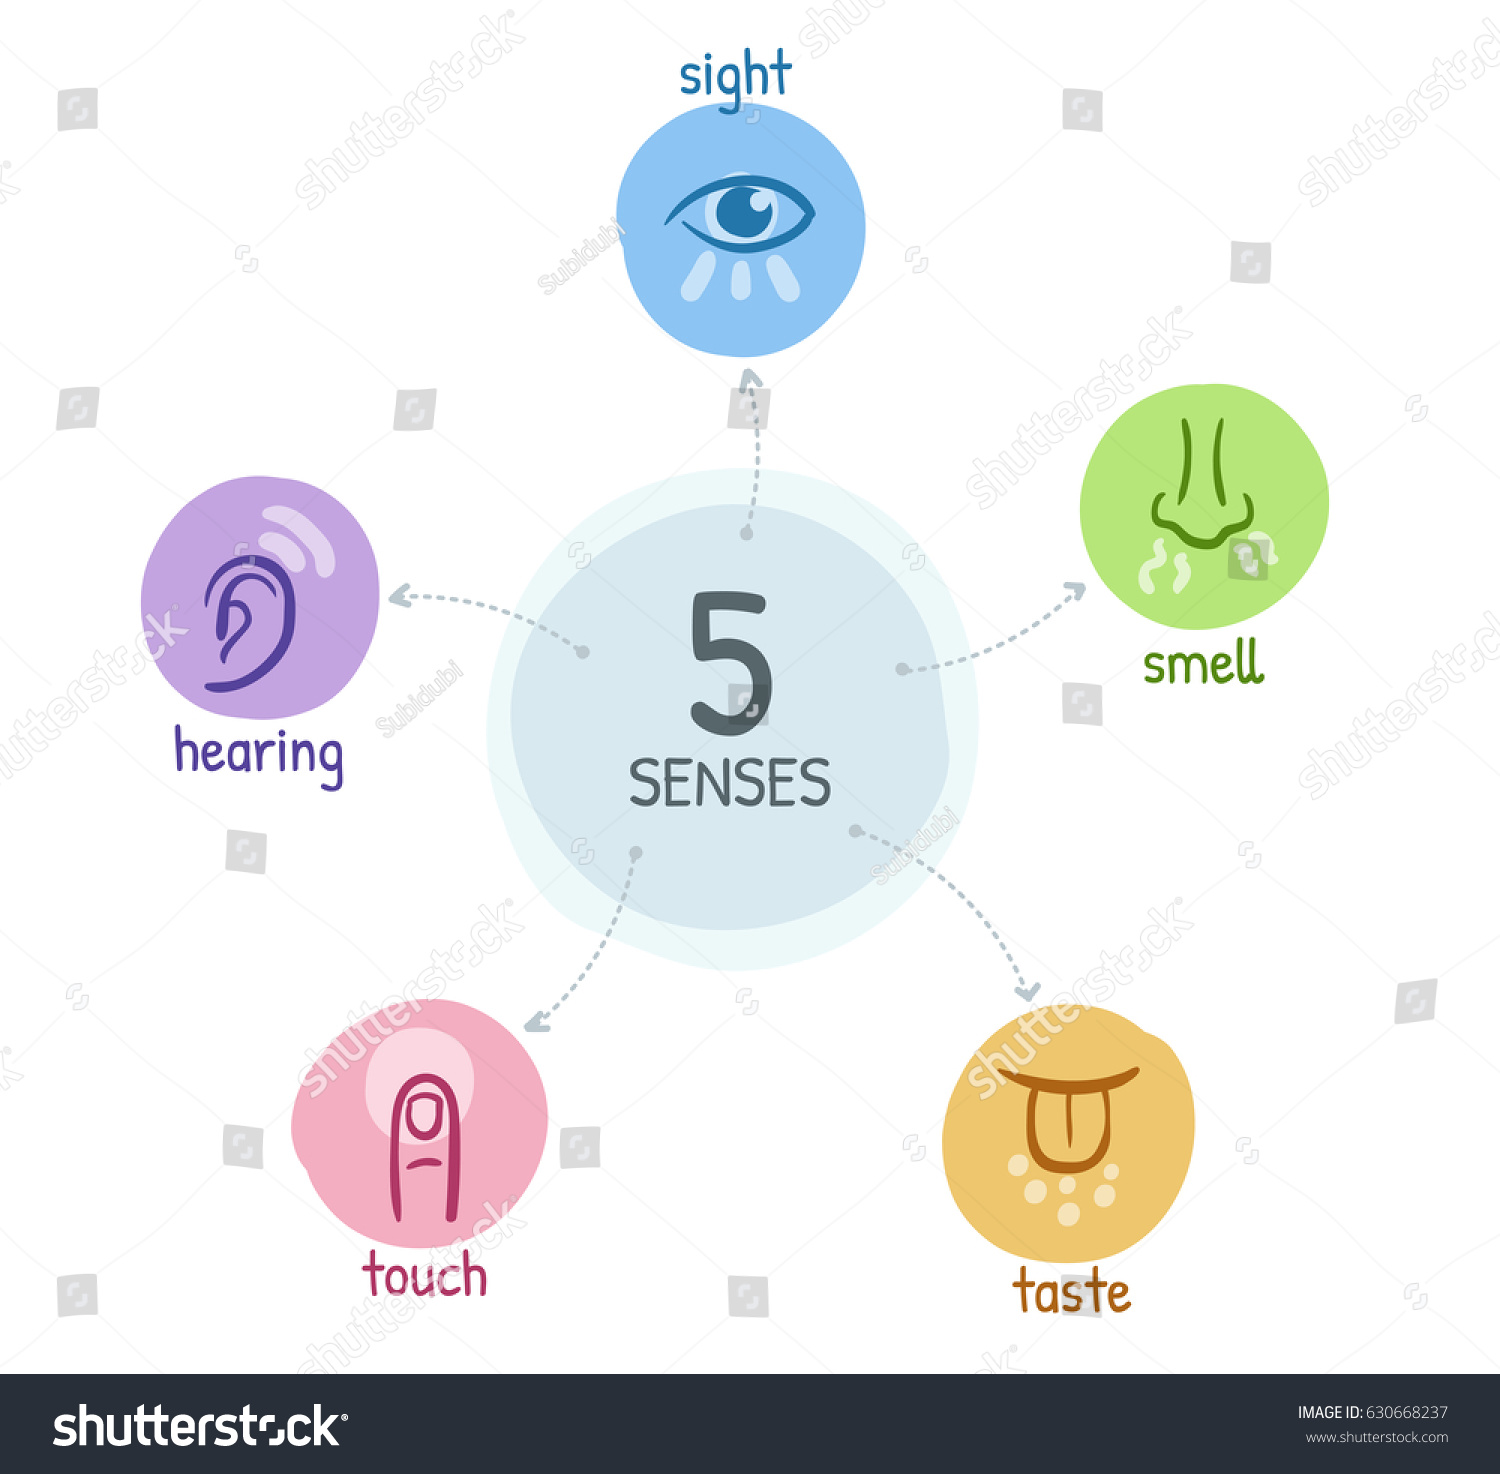 Five Senses Simple Hand Drawn Icons Stock Vector 630668237 - Shutterstock